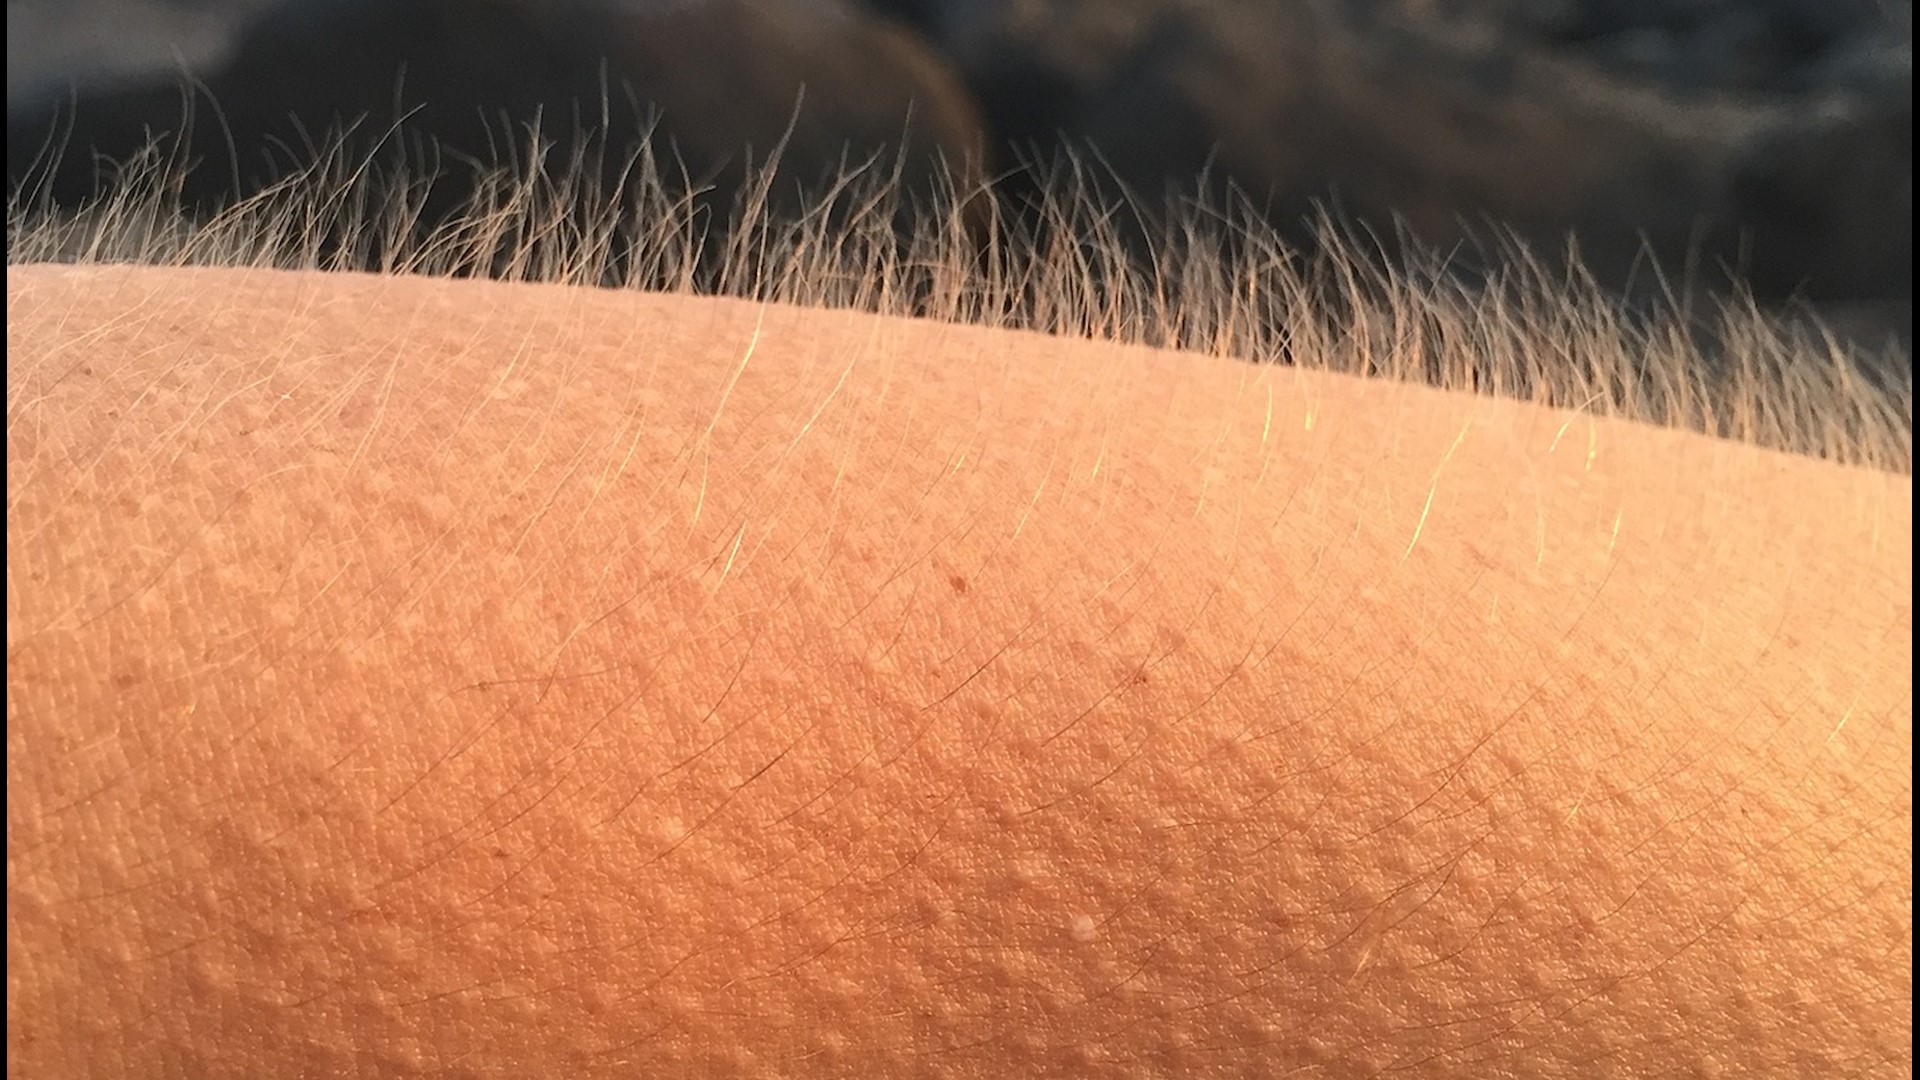 Goosebumps may help protect animals in the cold, but Harvard University researchers found there's a different reason humans evolved this reaction.